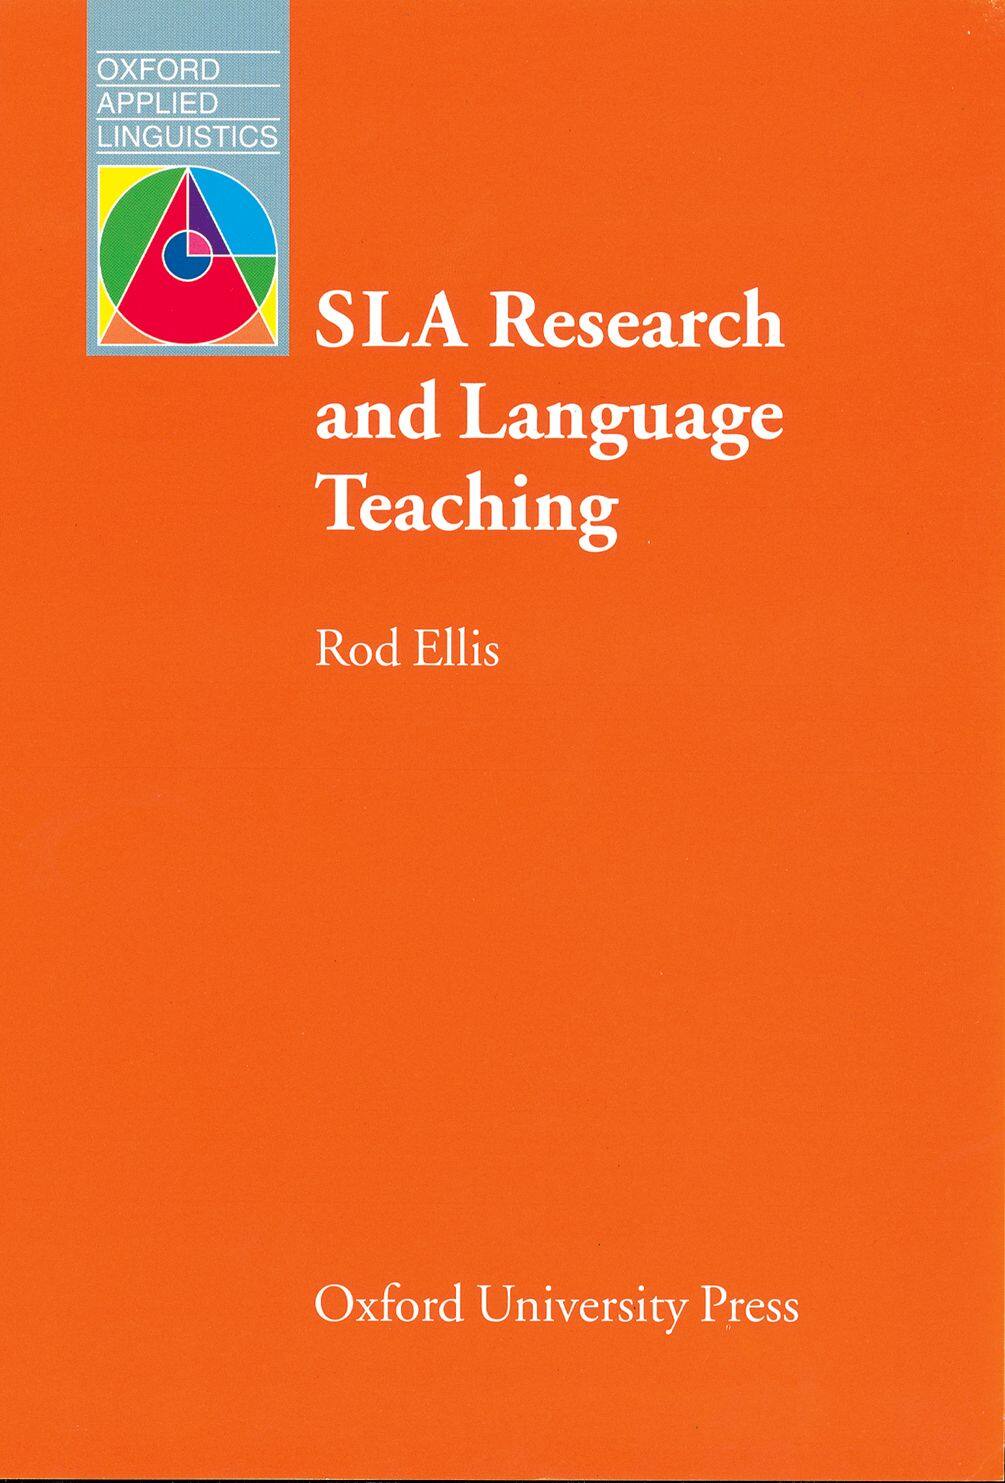 Oxford Applied Linguistics : SLA Research and Language Teaching